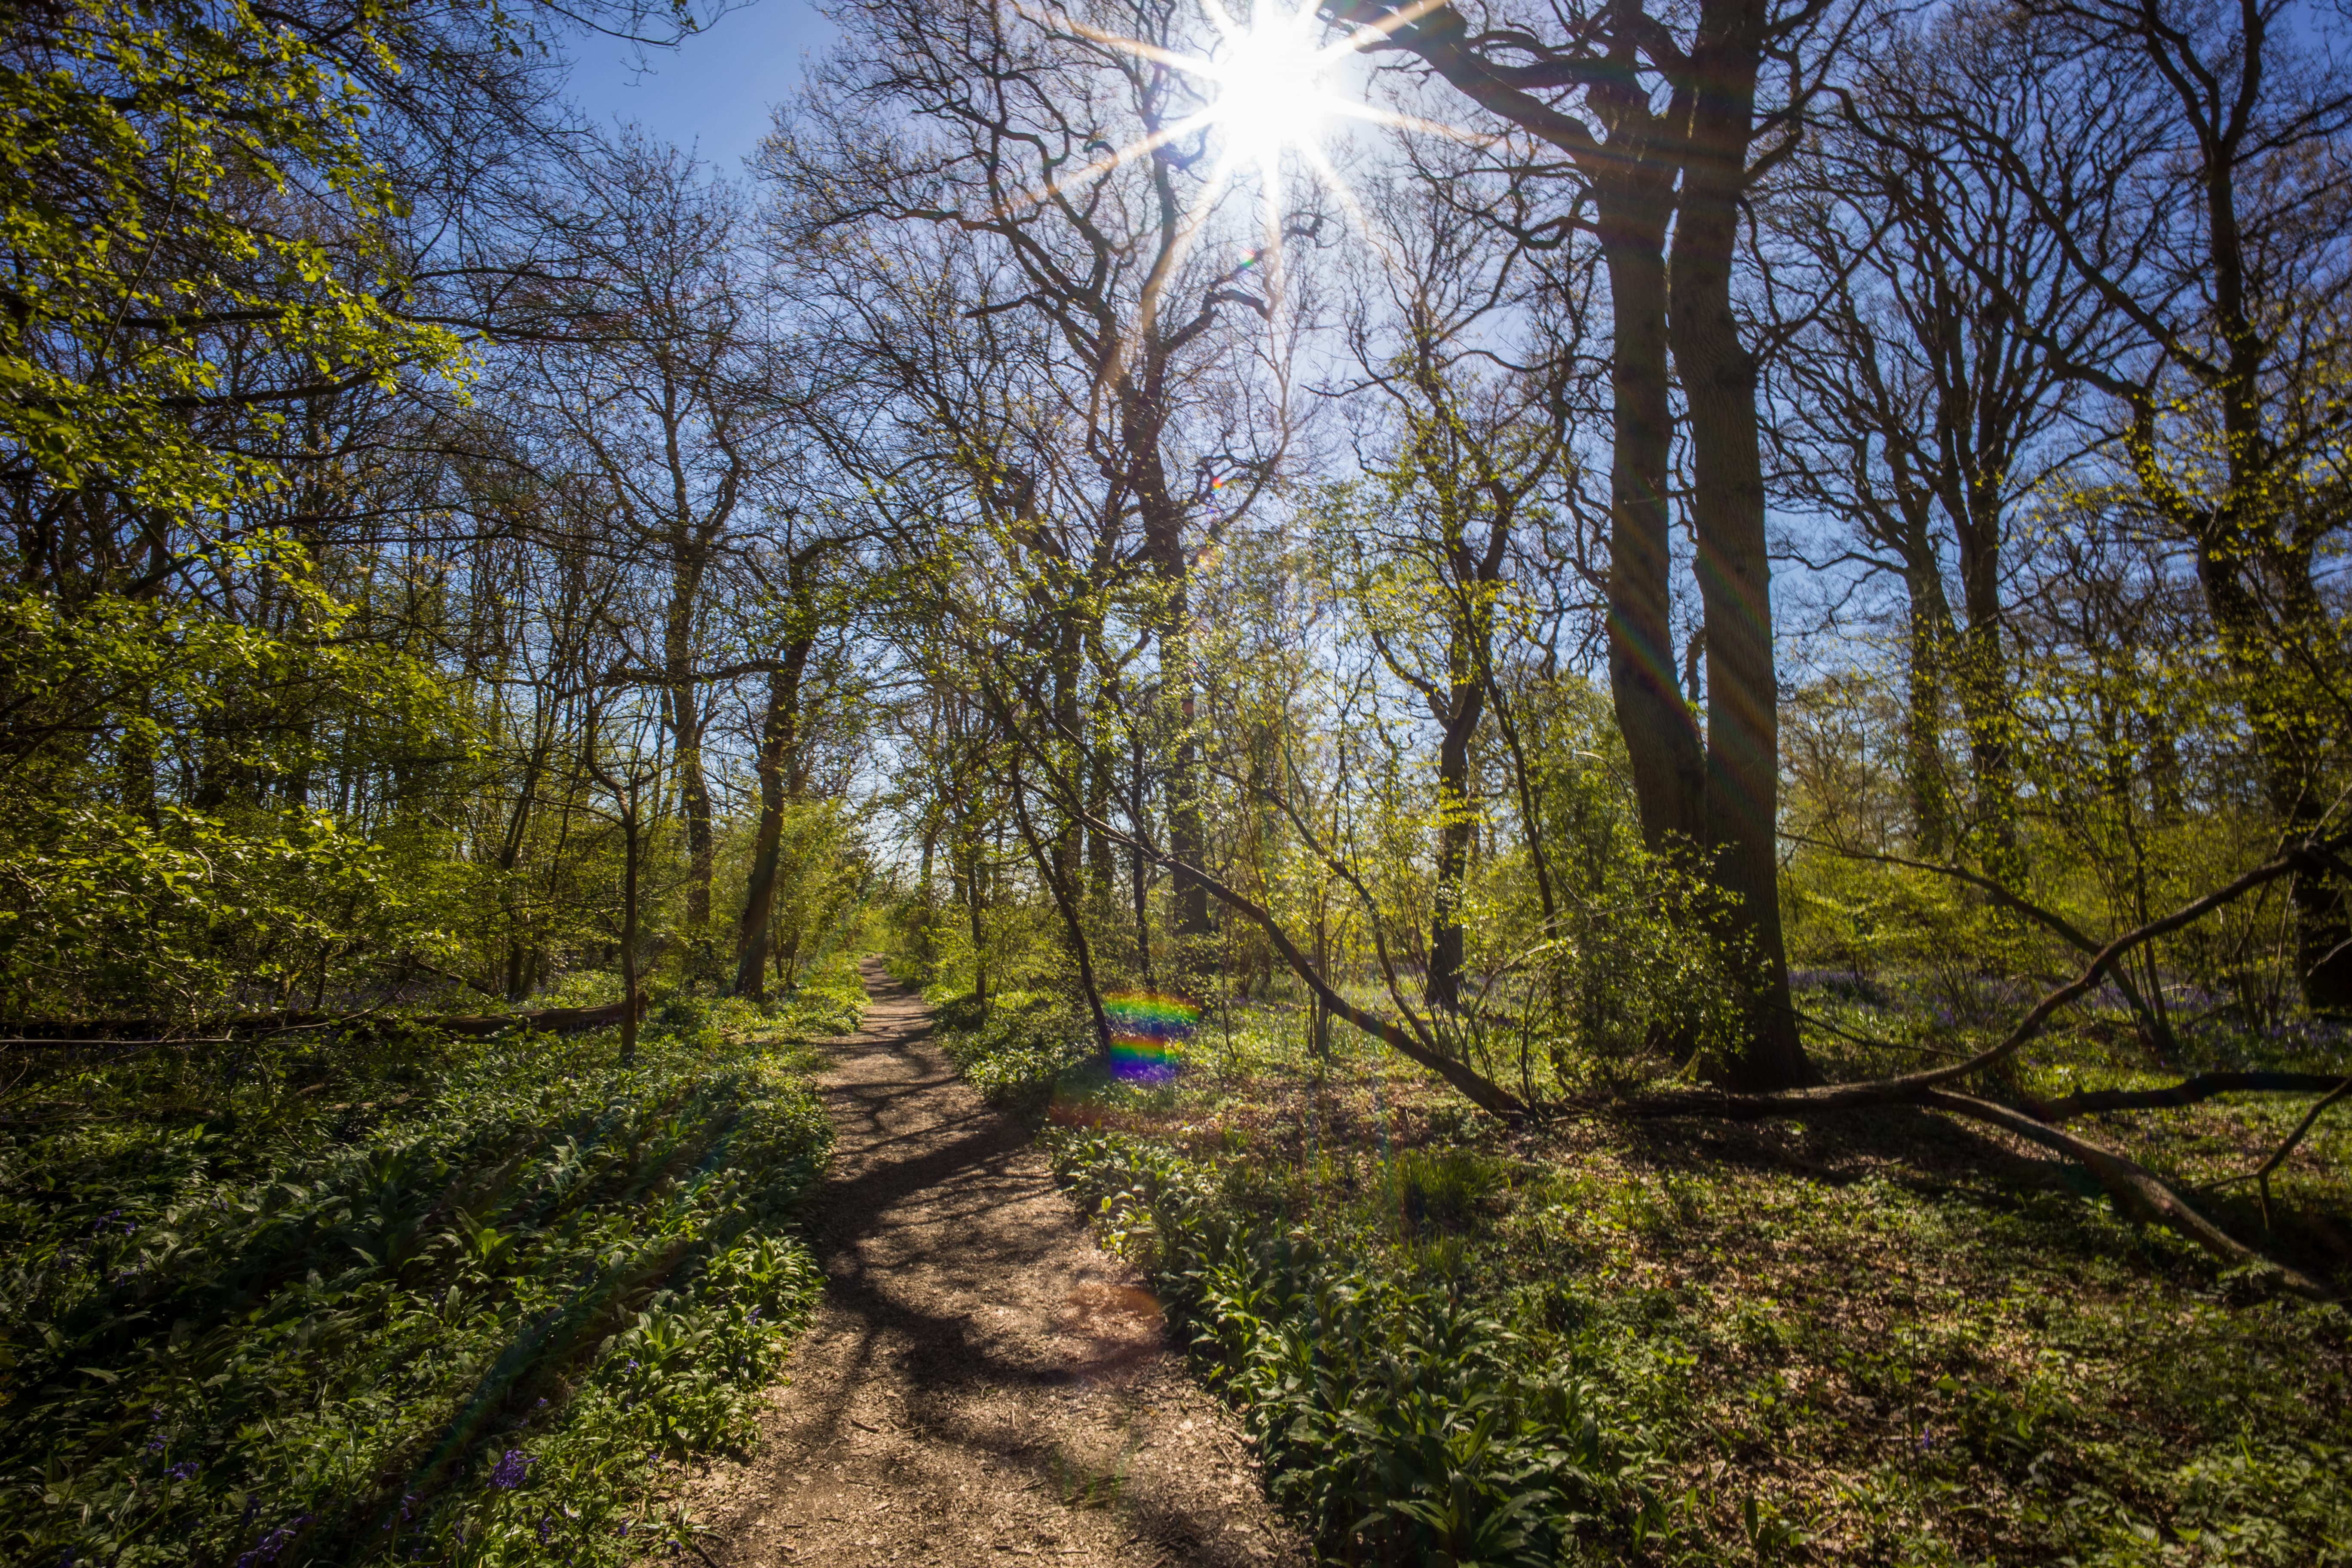 Sun with sunburst effect above a forest path in spring with trees starting to turn green